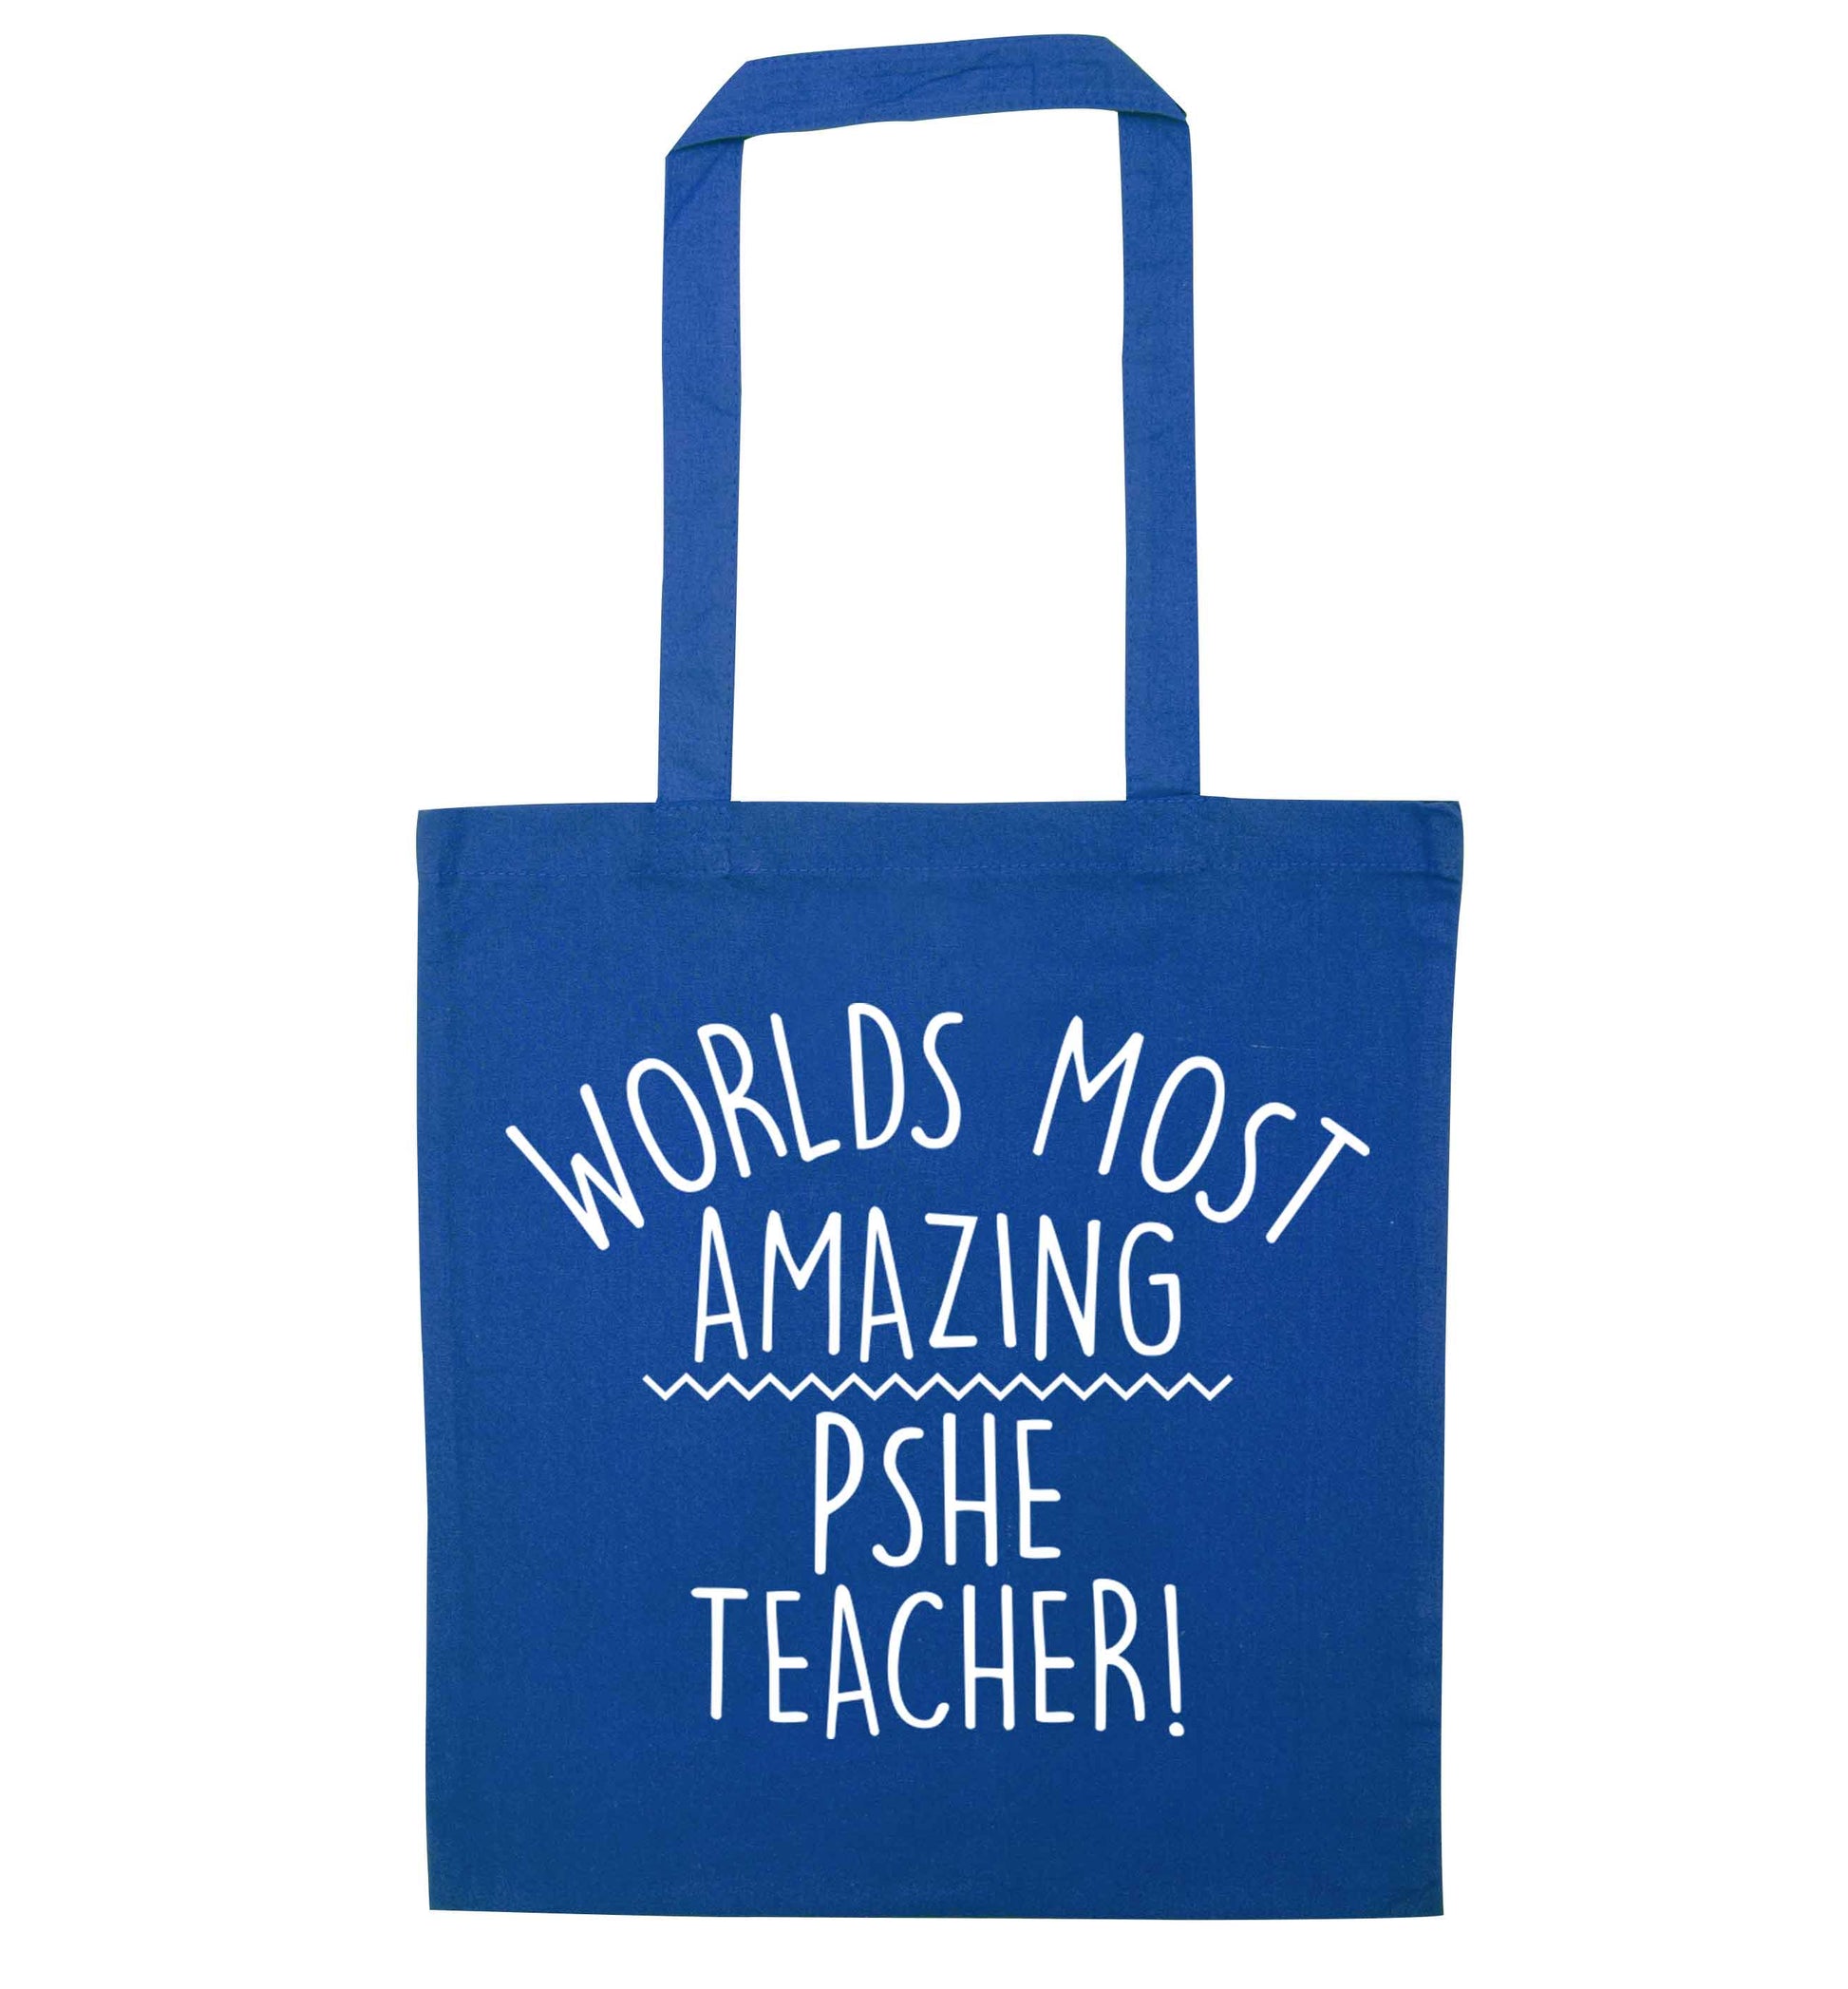 Worlds most amazing PHSE teacher blue tote bag